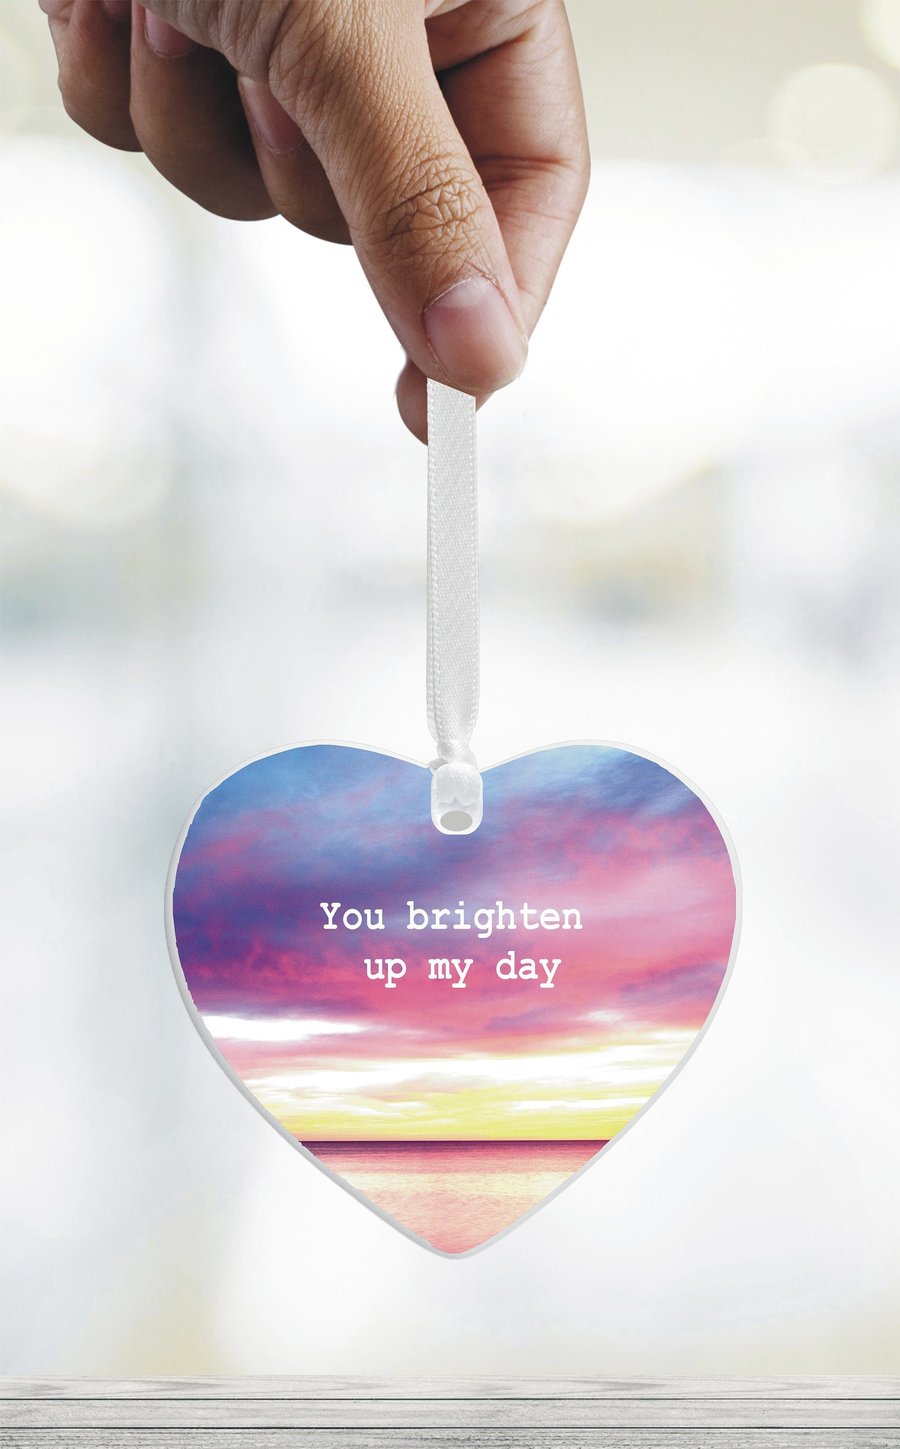 You Brighten Up My Day Ceramic Heart Keepsake - Ideal Friend or Colleague Gift